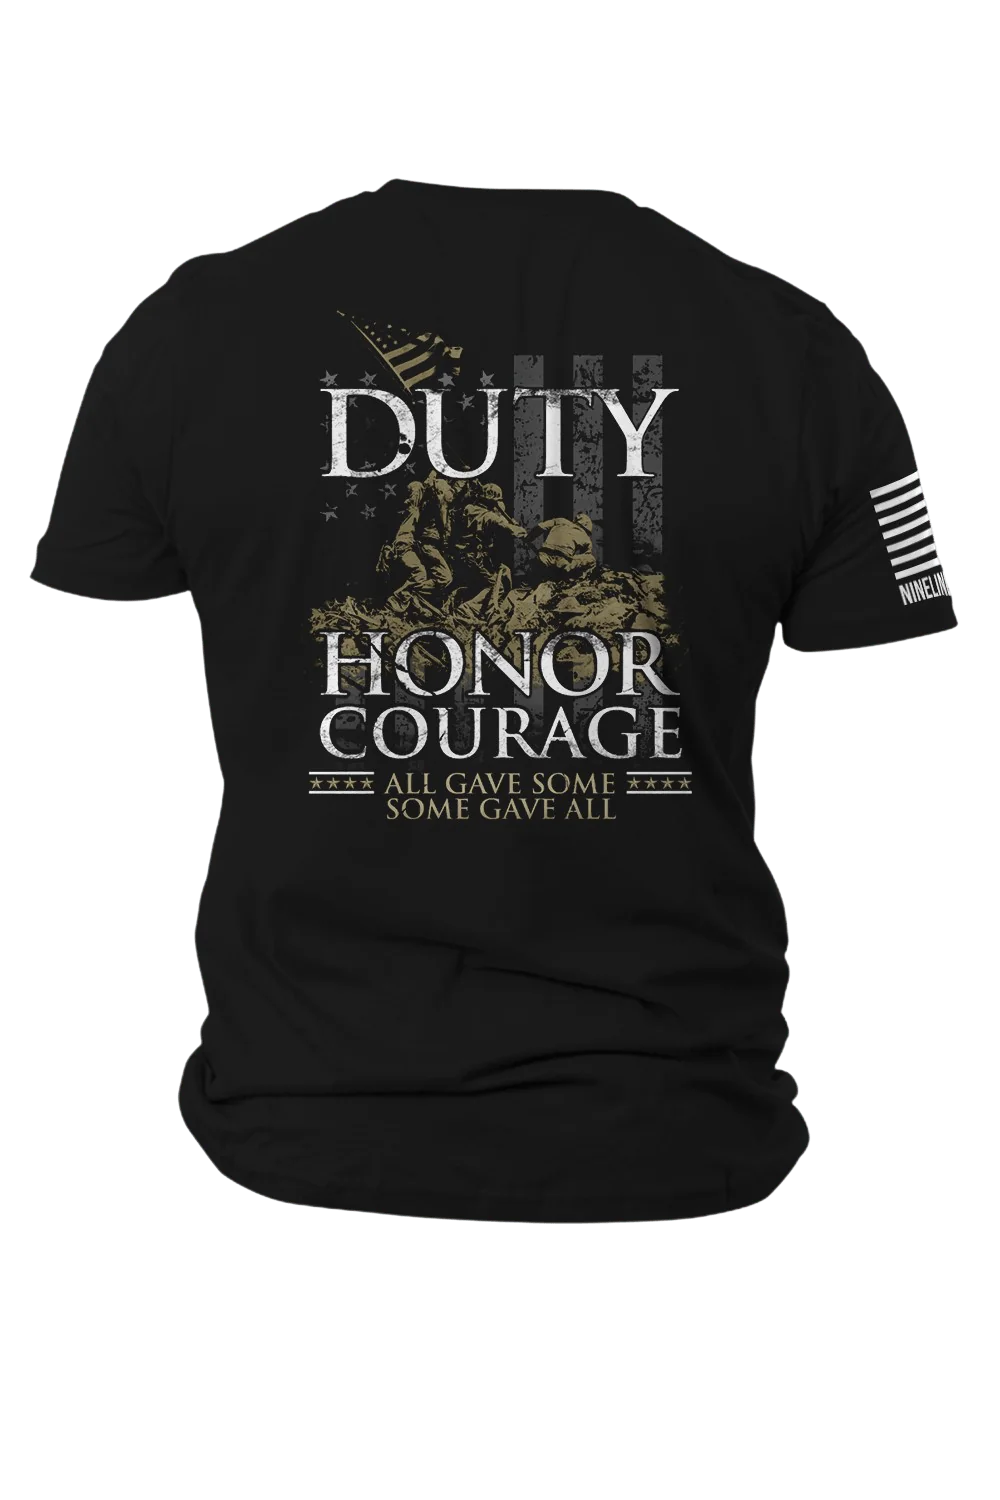 Nine Line Men's Duty Honor Courage T-Shirt posted by ProdOrigin USA in Men's Apparel